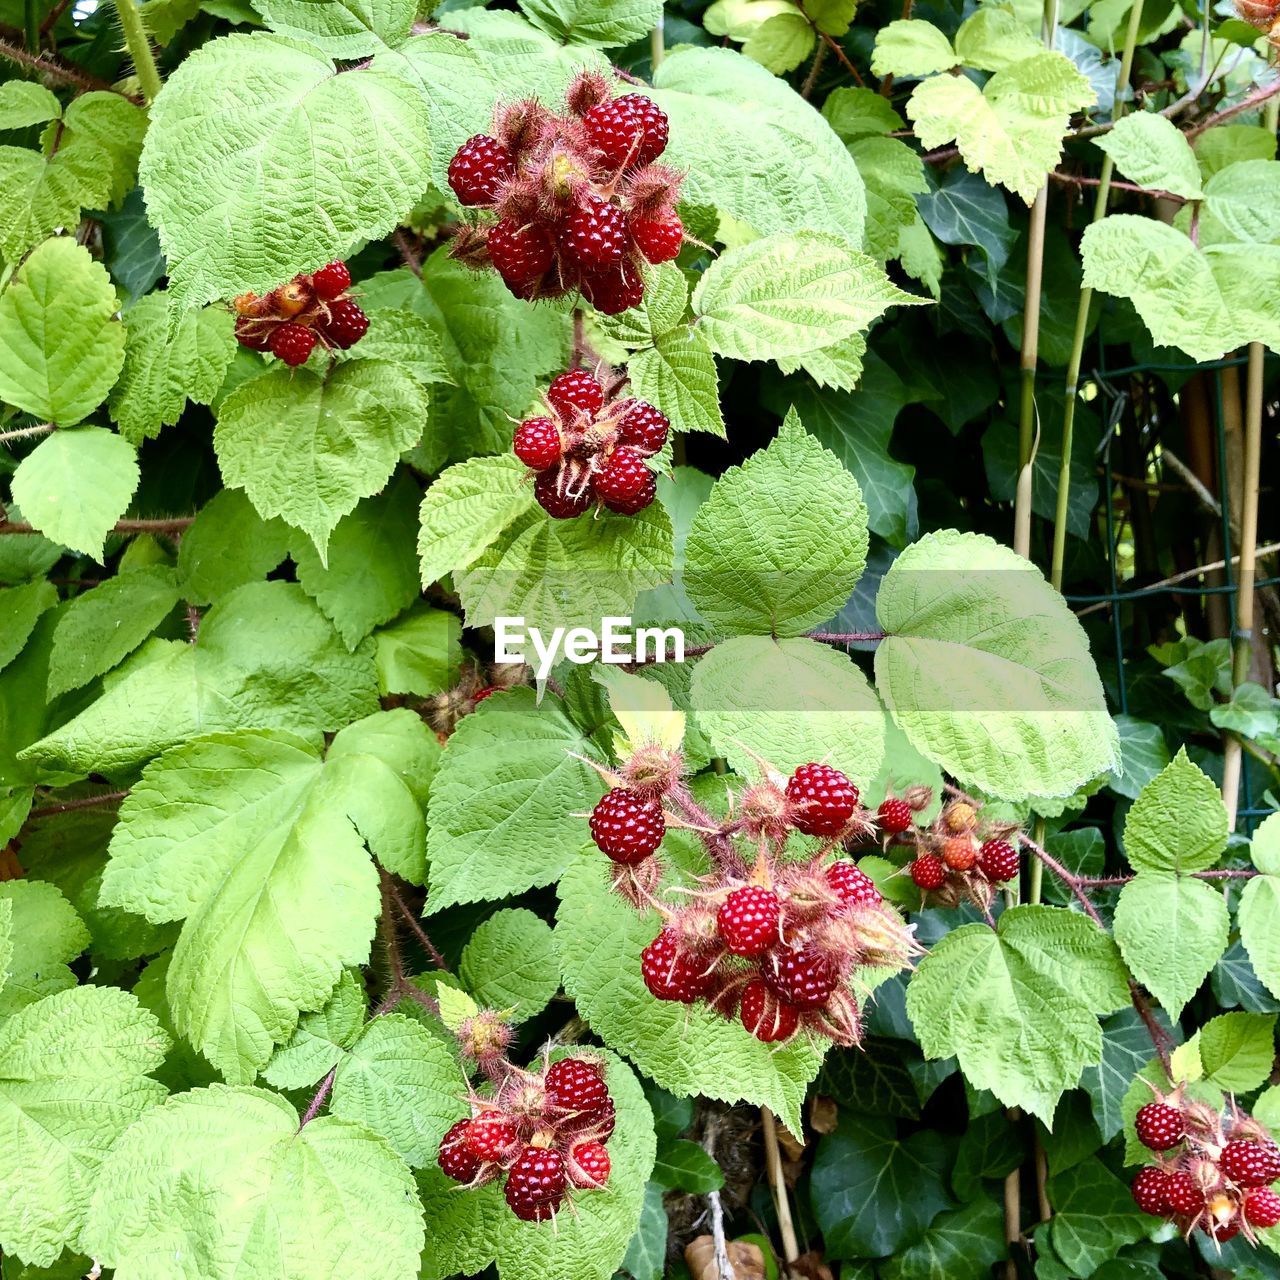 leaf, plant part, plant, growth, green, nature, flower, freshness, beauty in nature, produce, no people, day, fruit, high angle view, dewberry, berry, healthy eating, close-up, food and drink, outdoors, flowering plant, food, red, bramble, thimbleberry, garden, herb, fragility